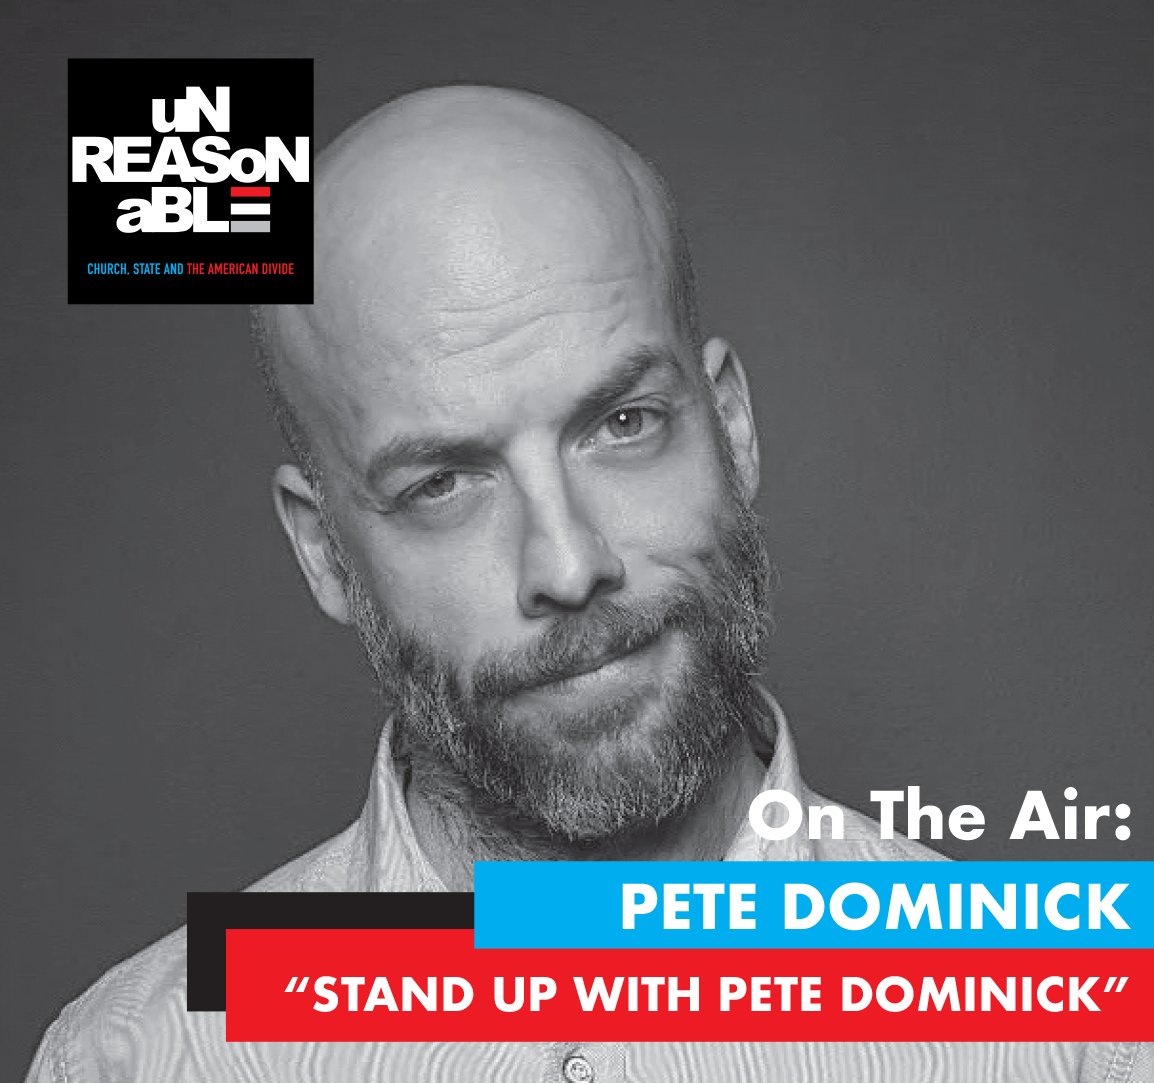 What a great time talking to comedian and activist @petedominick on everything from politics to parenting to the importance of participation! Listen today! #petedominick #standupwithpetedominick #activism #politics #comedy #satire #news #dosomething